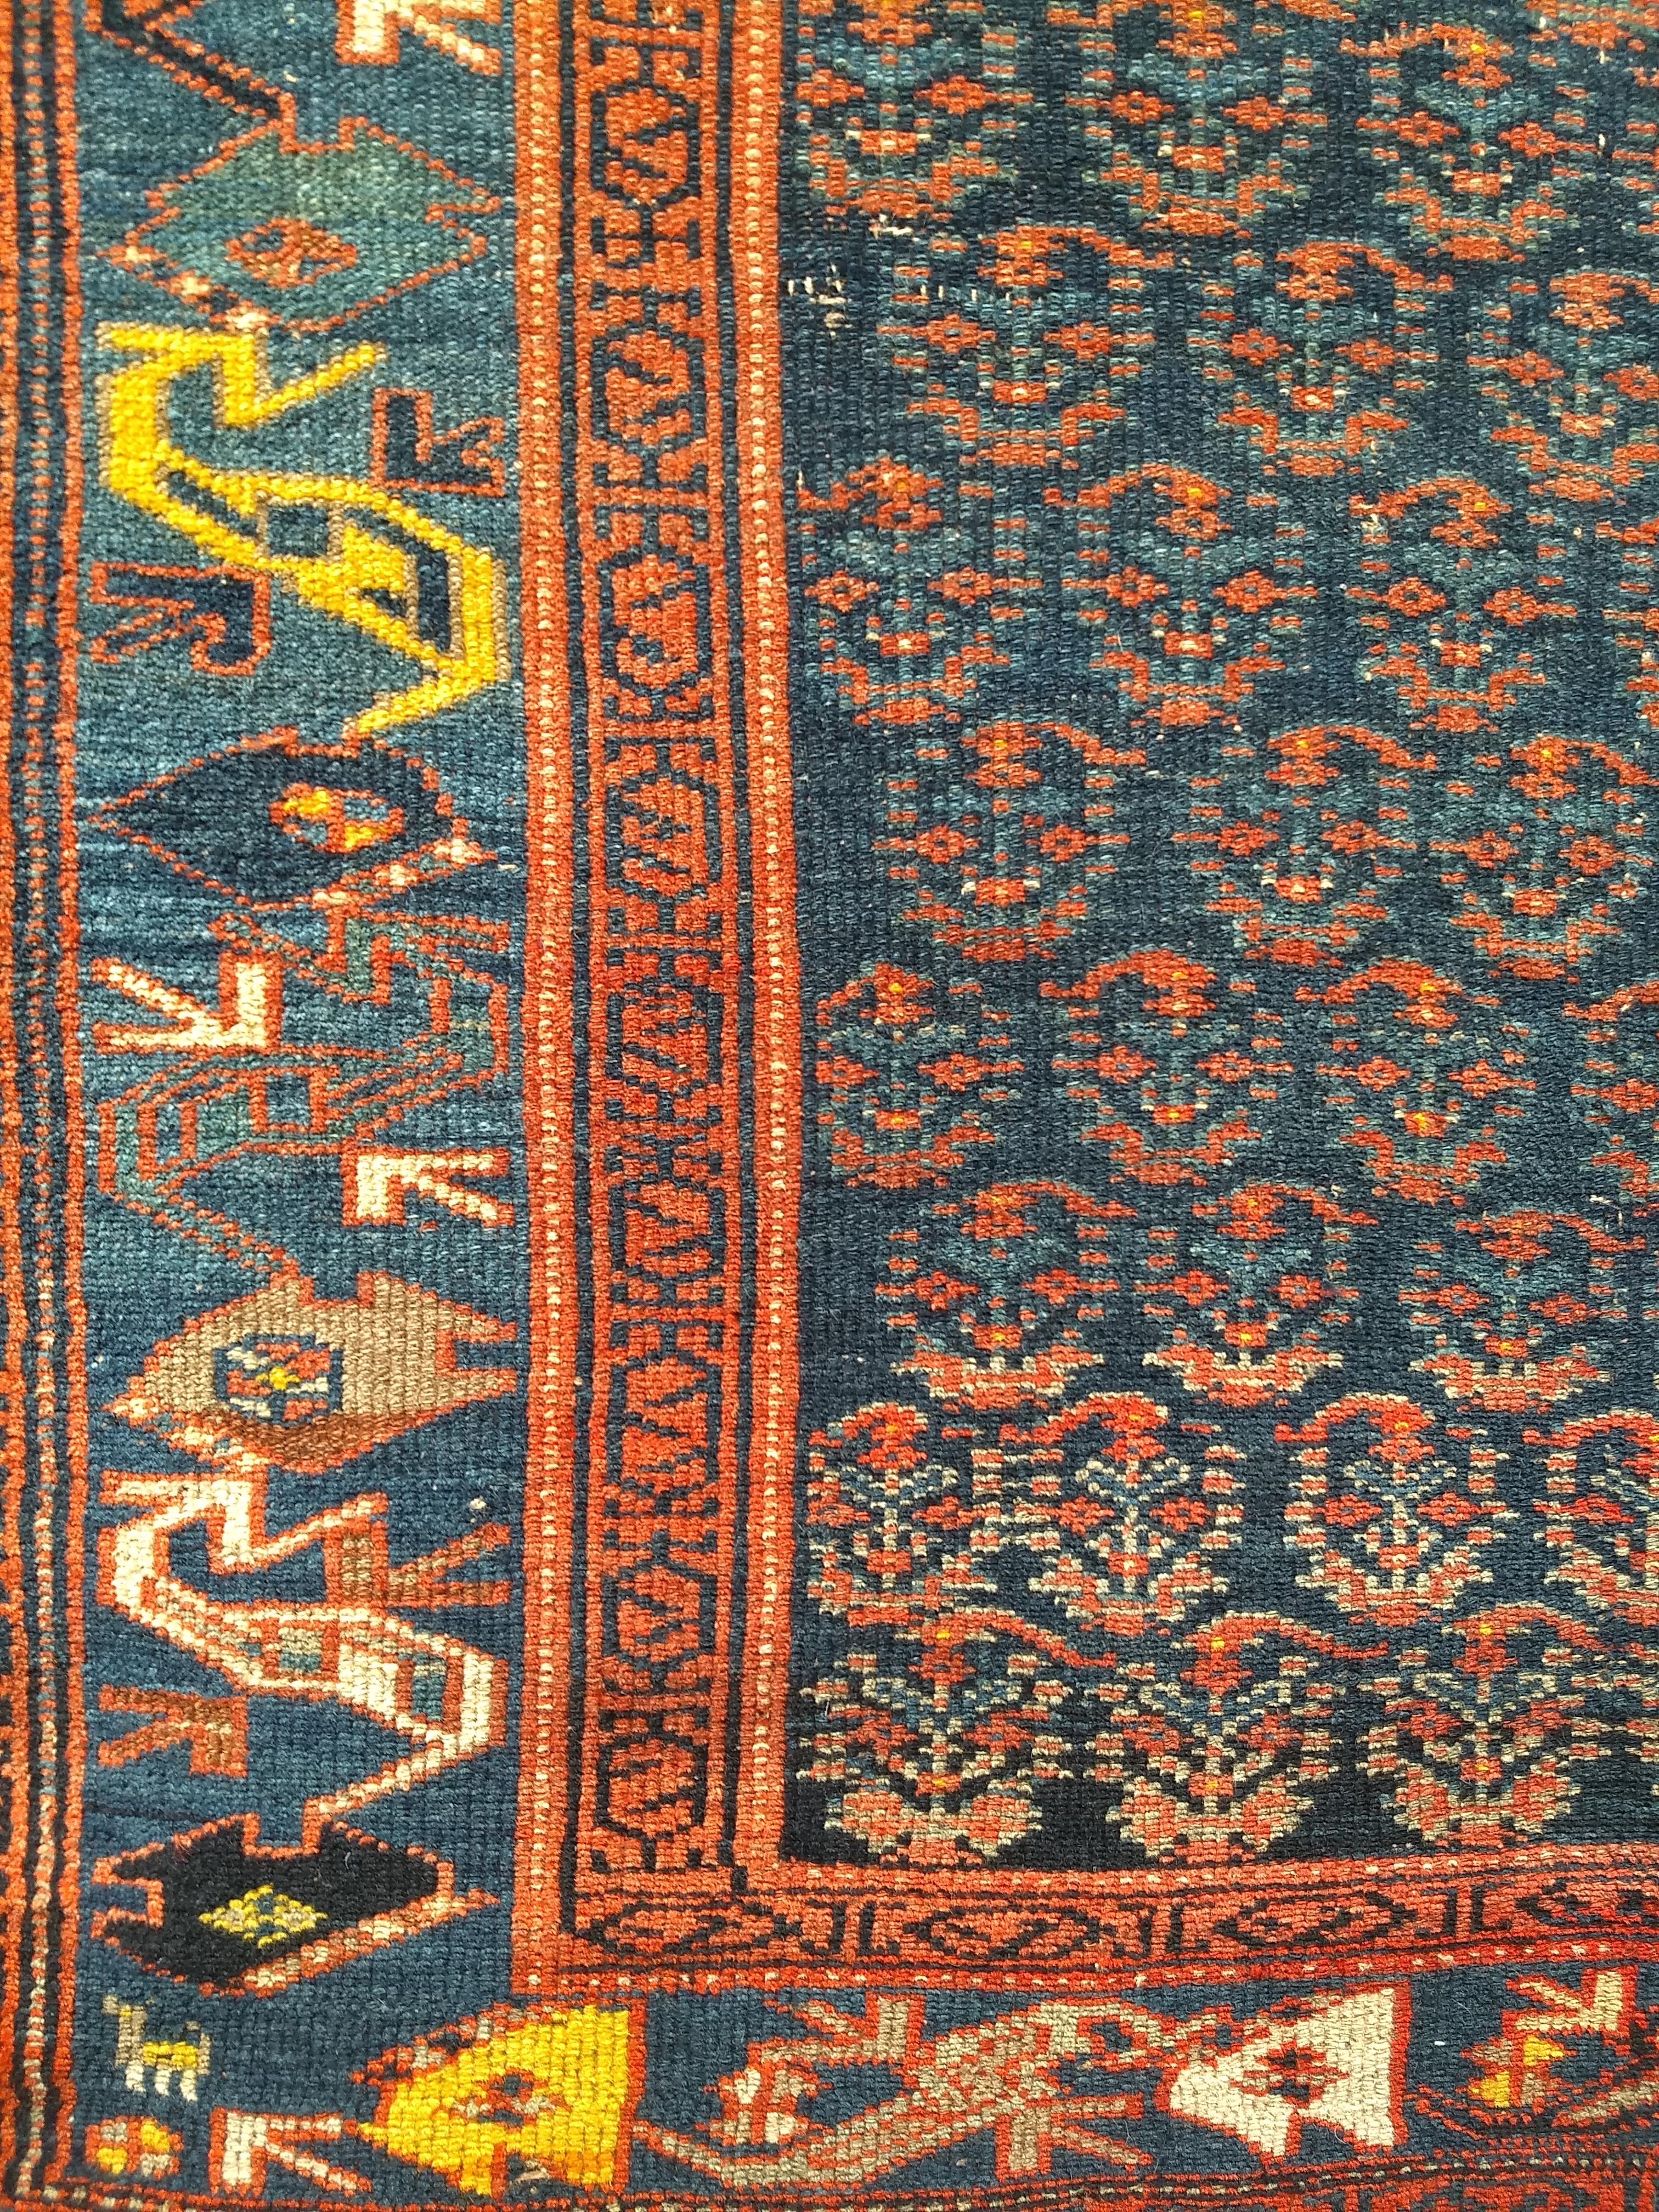 Vintage Persian Bidjar Area Rug in Allover Paisley in Navy Blue, Green, Yellow In Good Condition For Sale In Barrington, IL